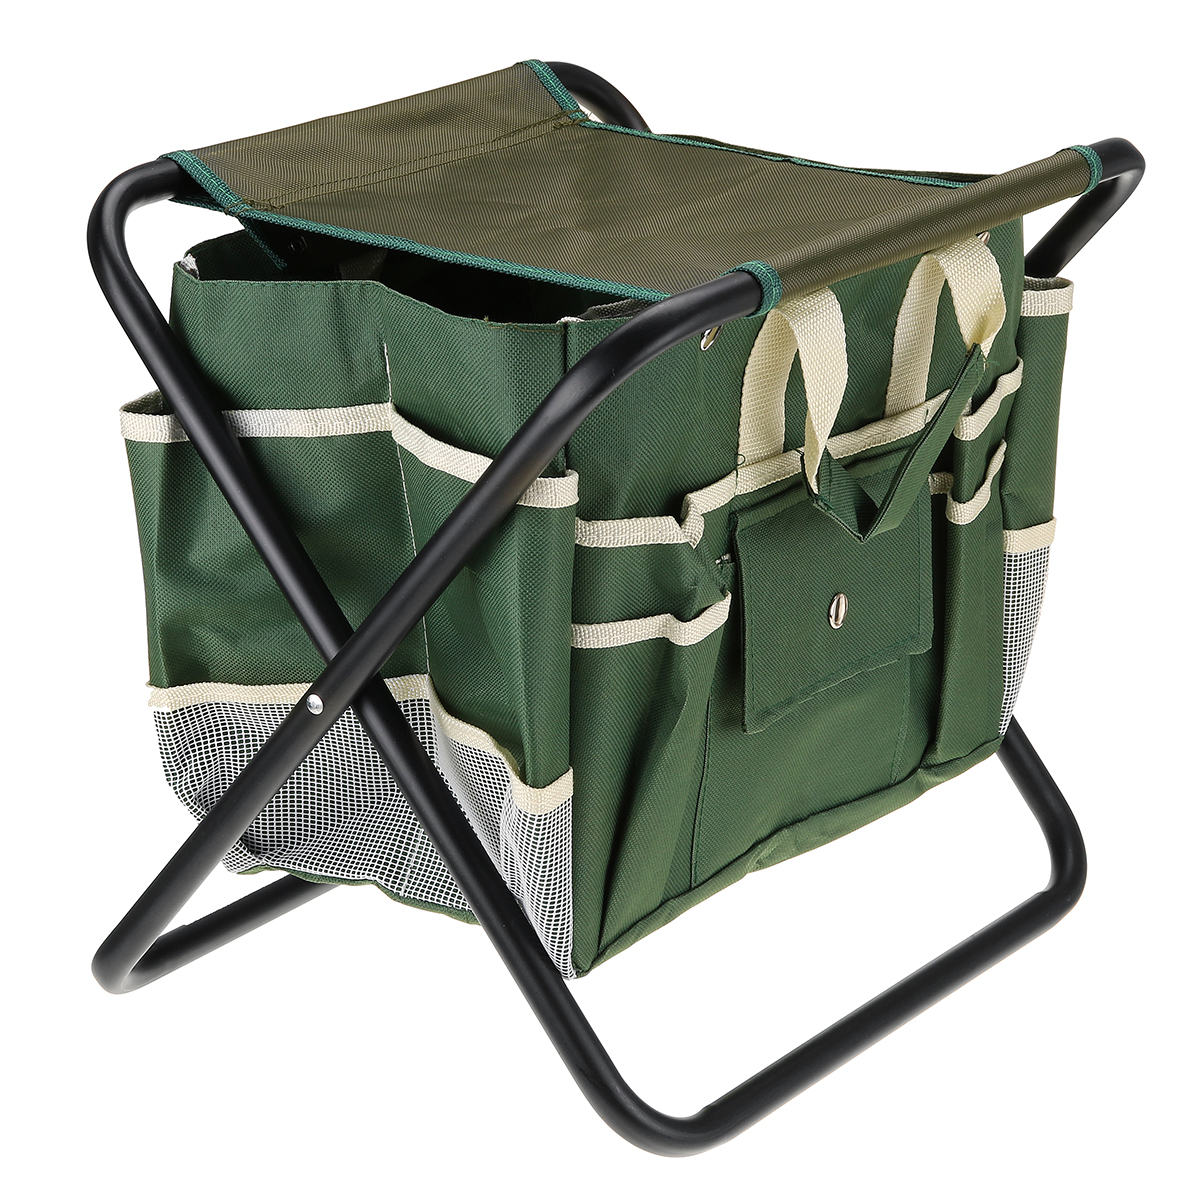 2-in-1-Folding-Chair-Fishing-Seat-with-Storage-Bag-Ultralight-Aluminum-Stool-Home-Furniture-Fishing--1792092-4